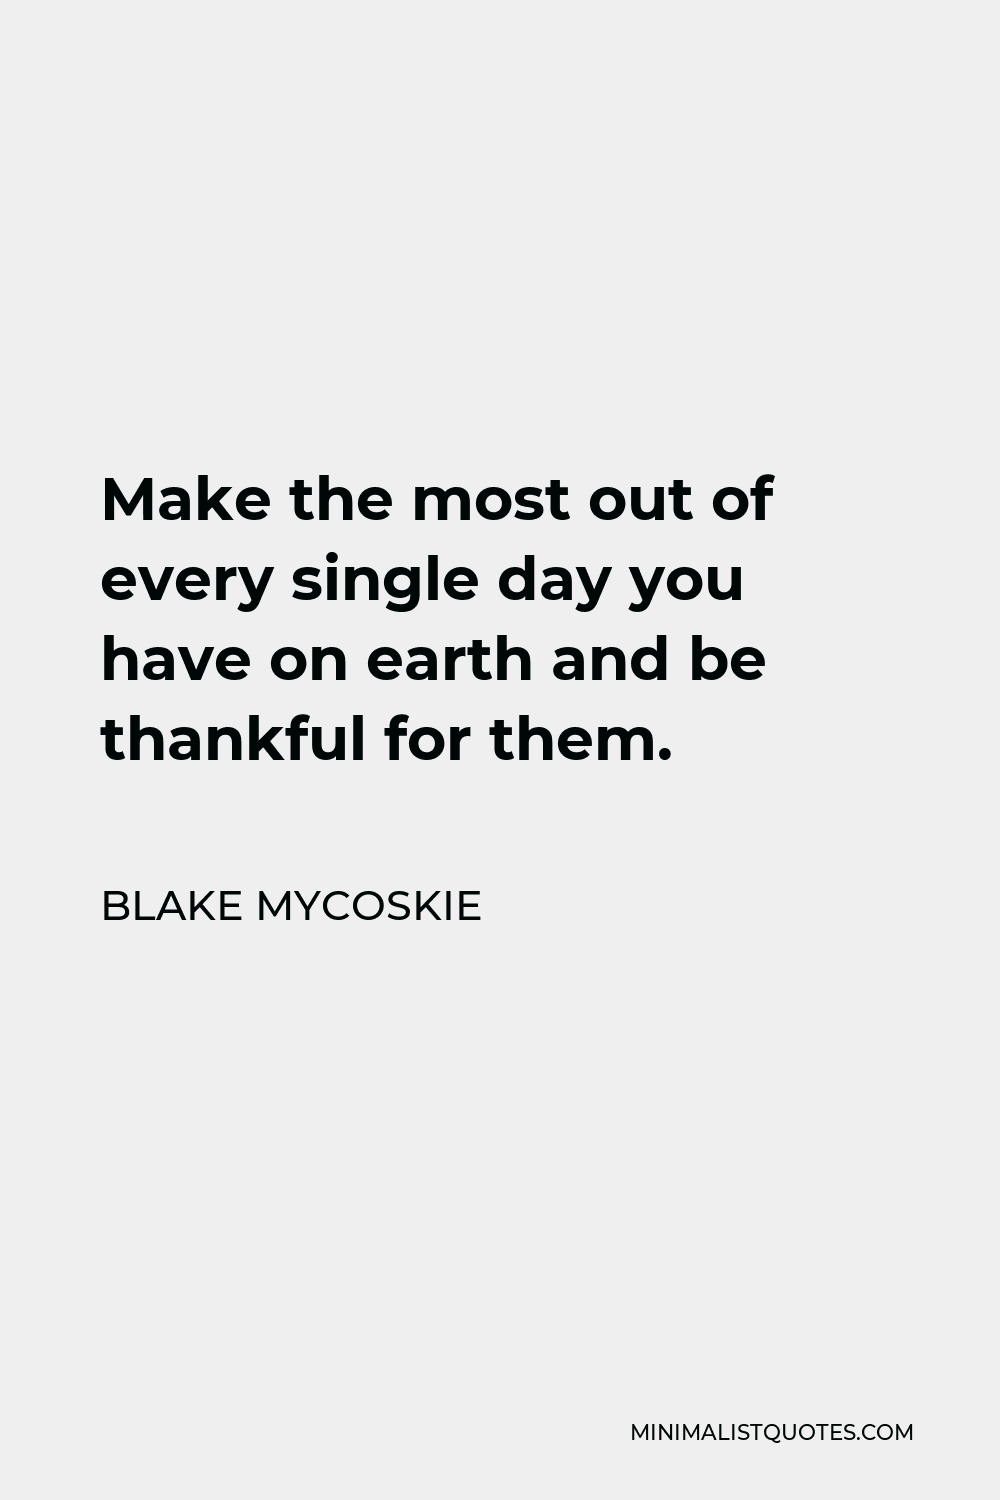 Blake Mycoskie Quote - Make the most out of every single day you have on earth and be thankful for them.